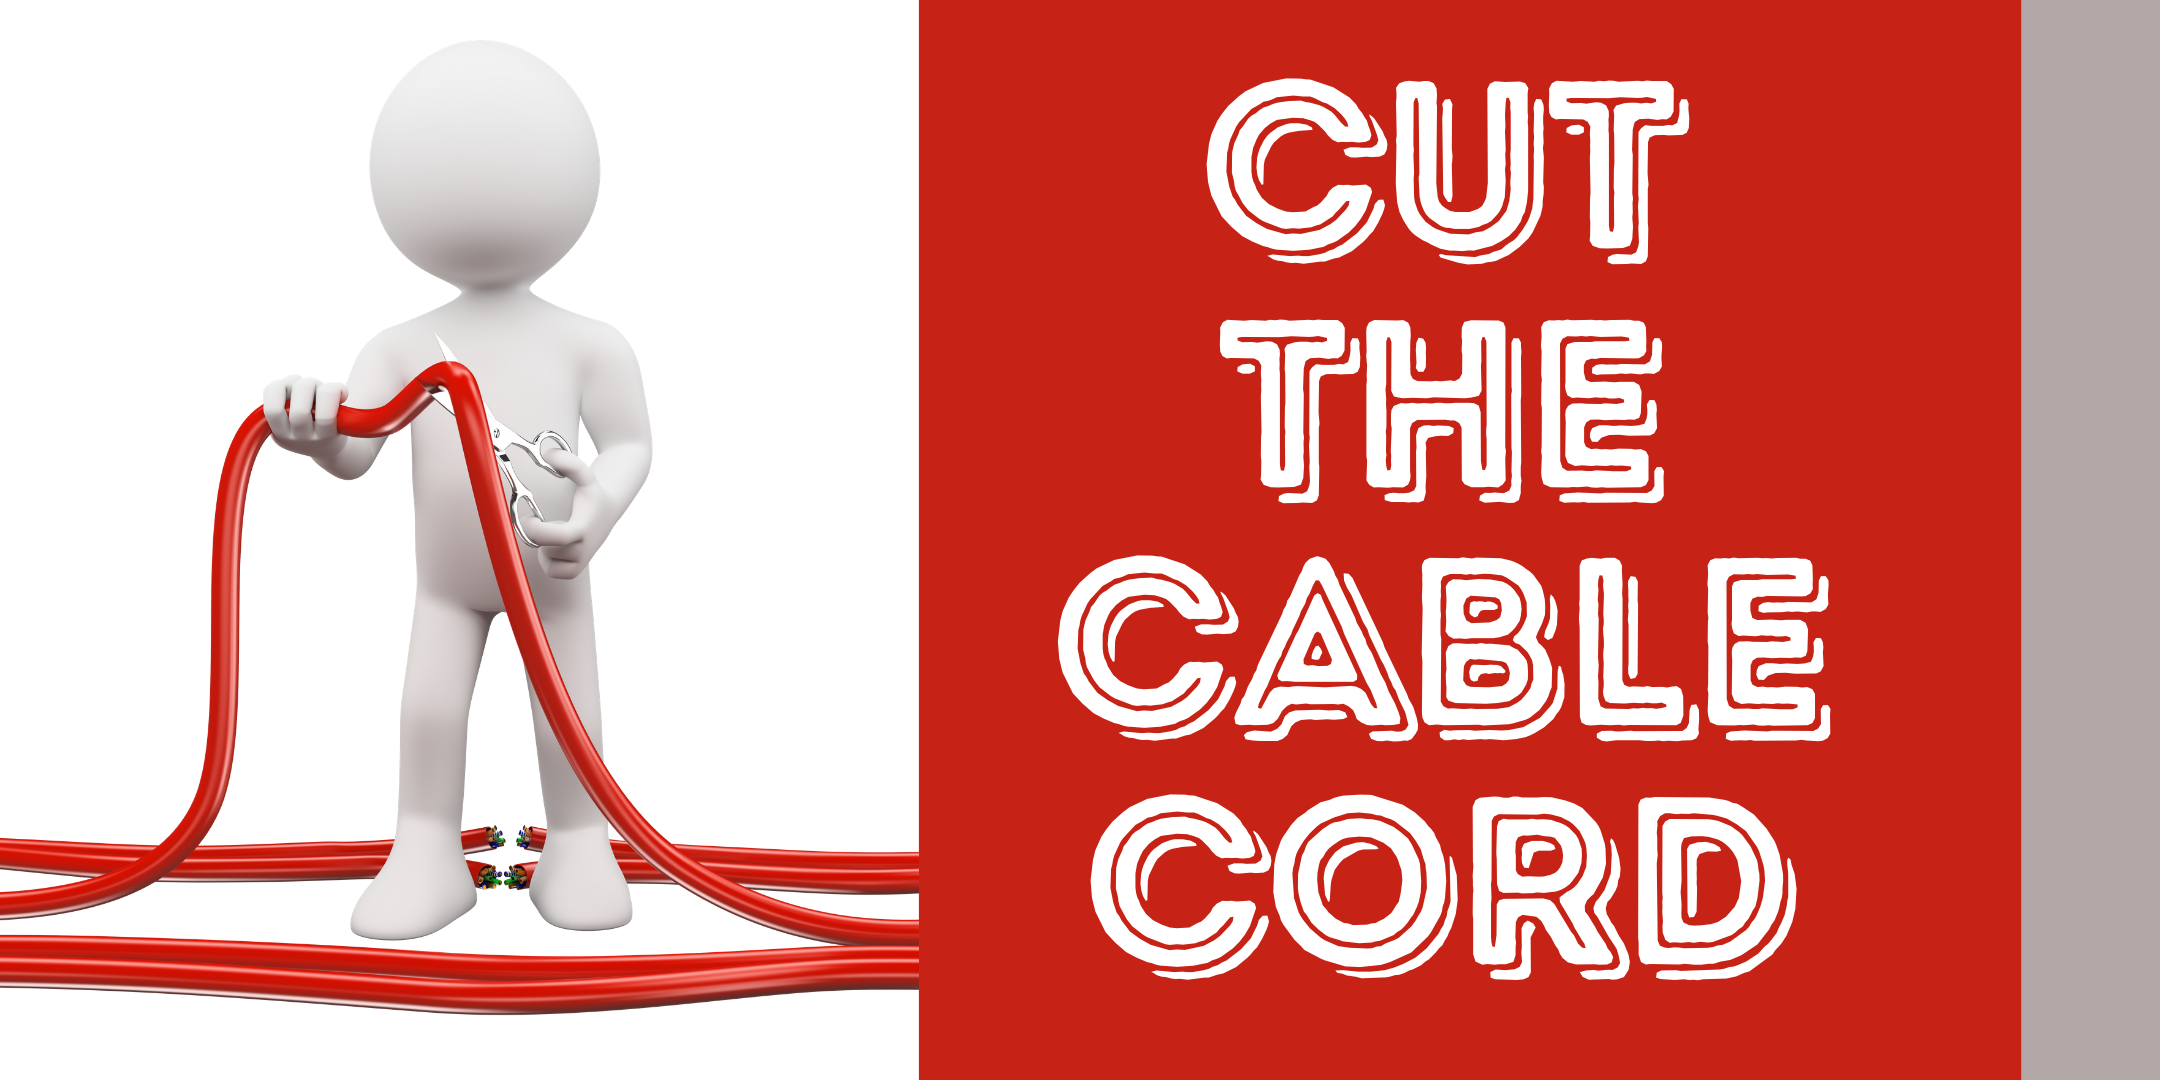 Cut the Cable Cord image